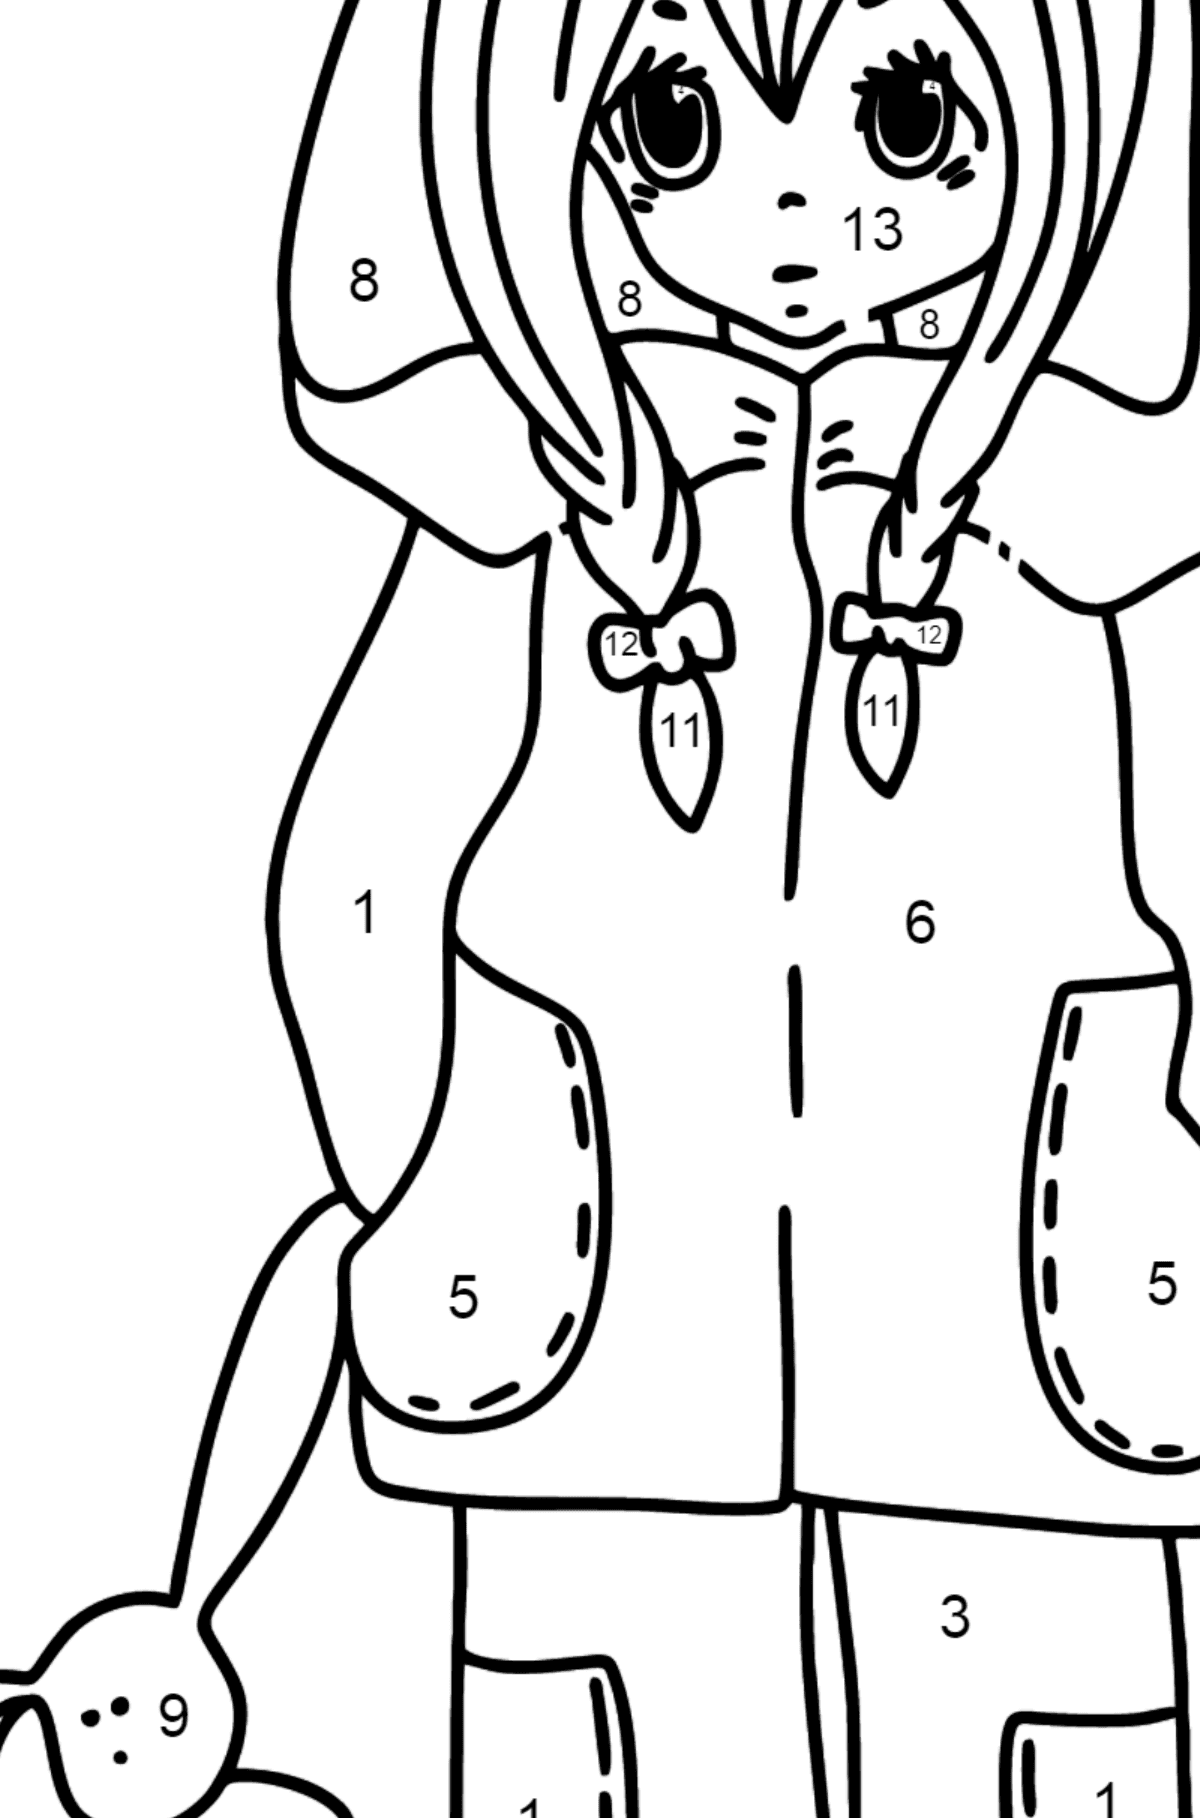 Anime girl with pigtails coloring page ♥ Online and Print for Free